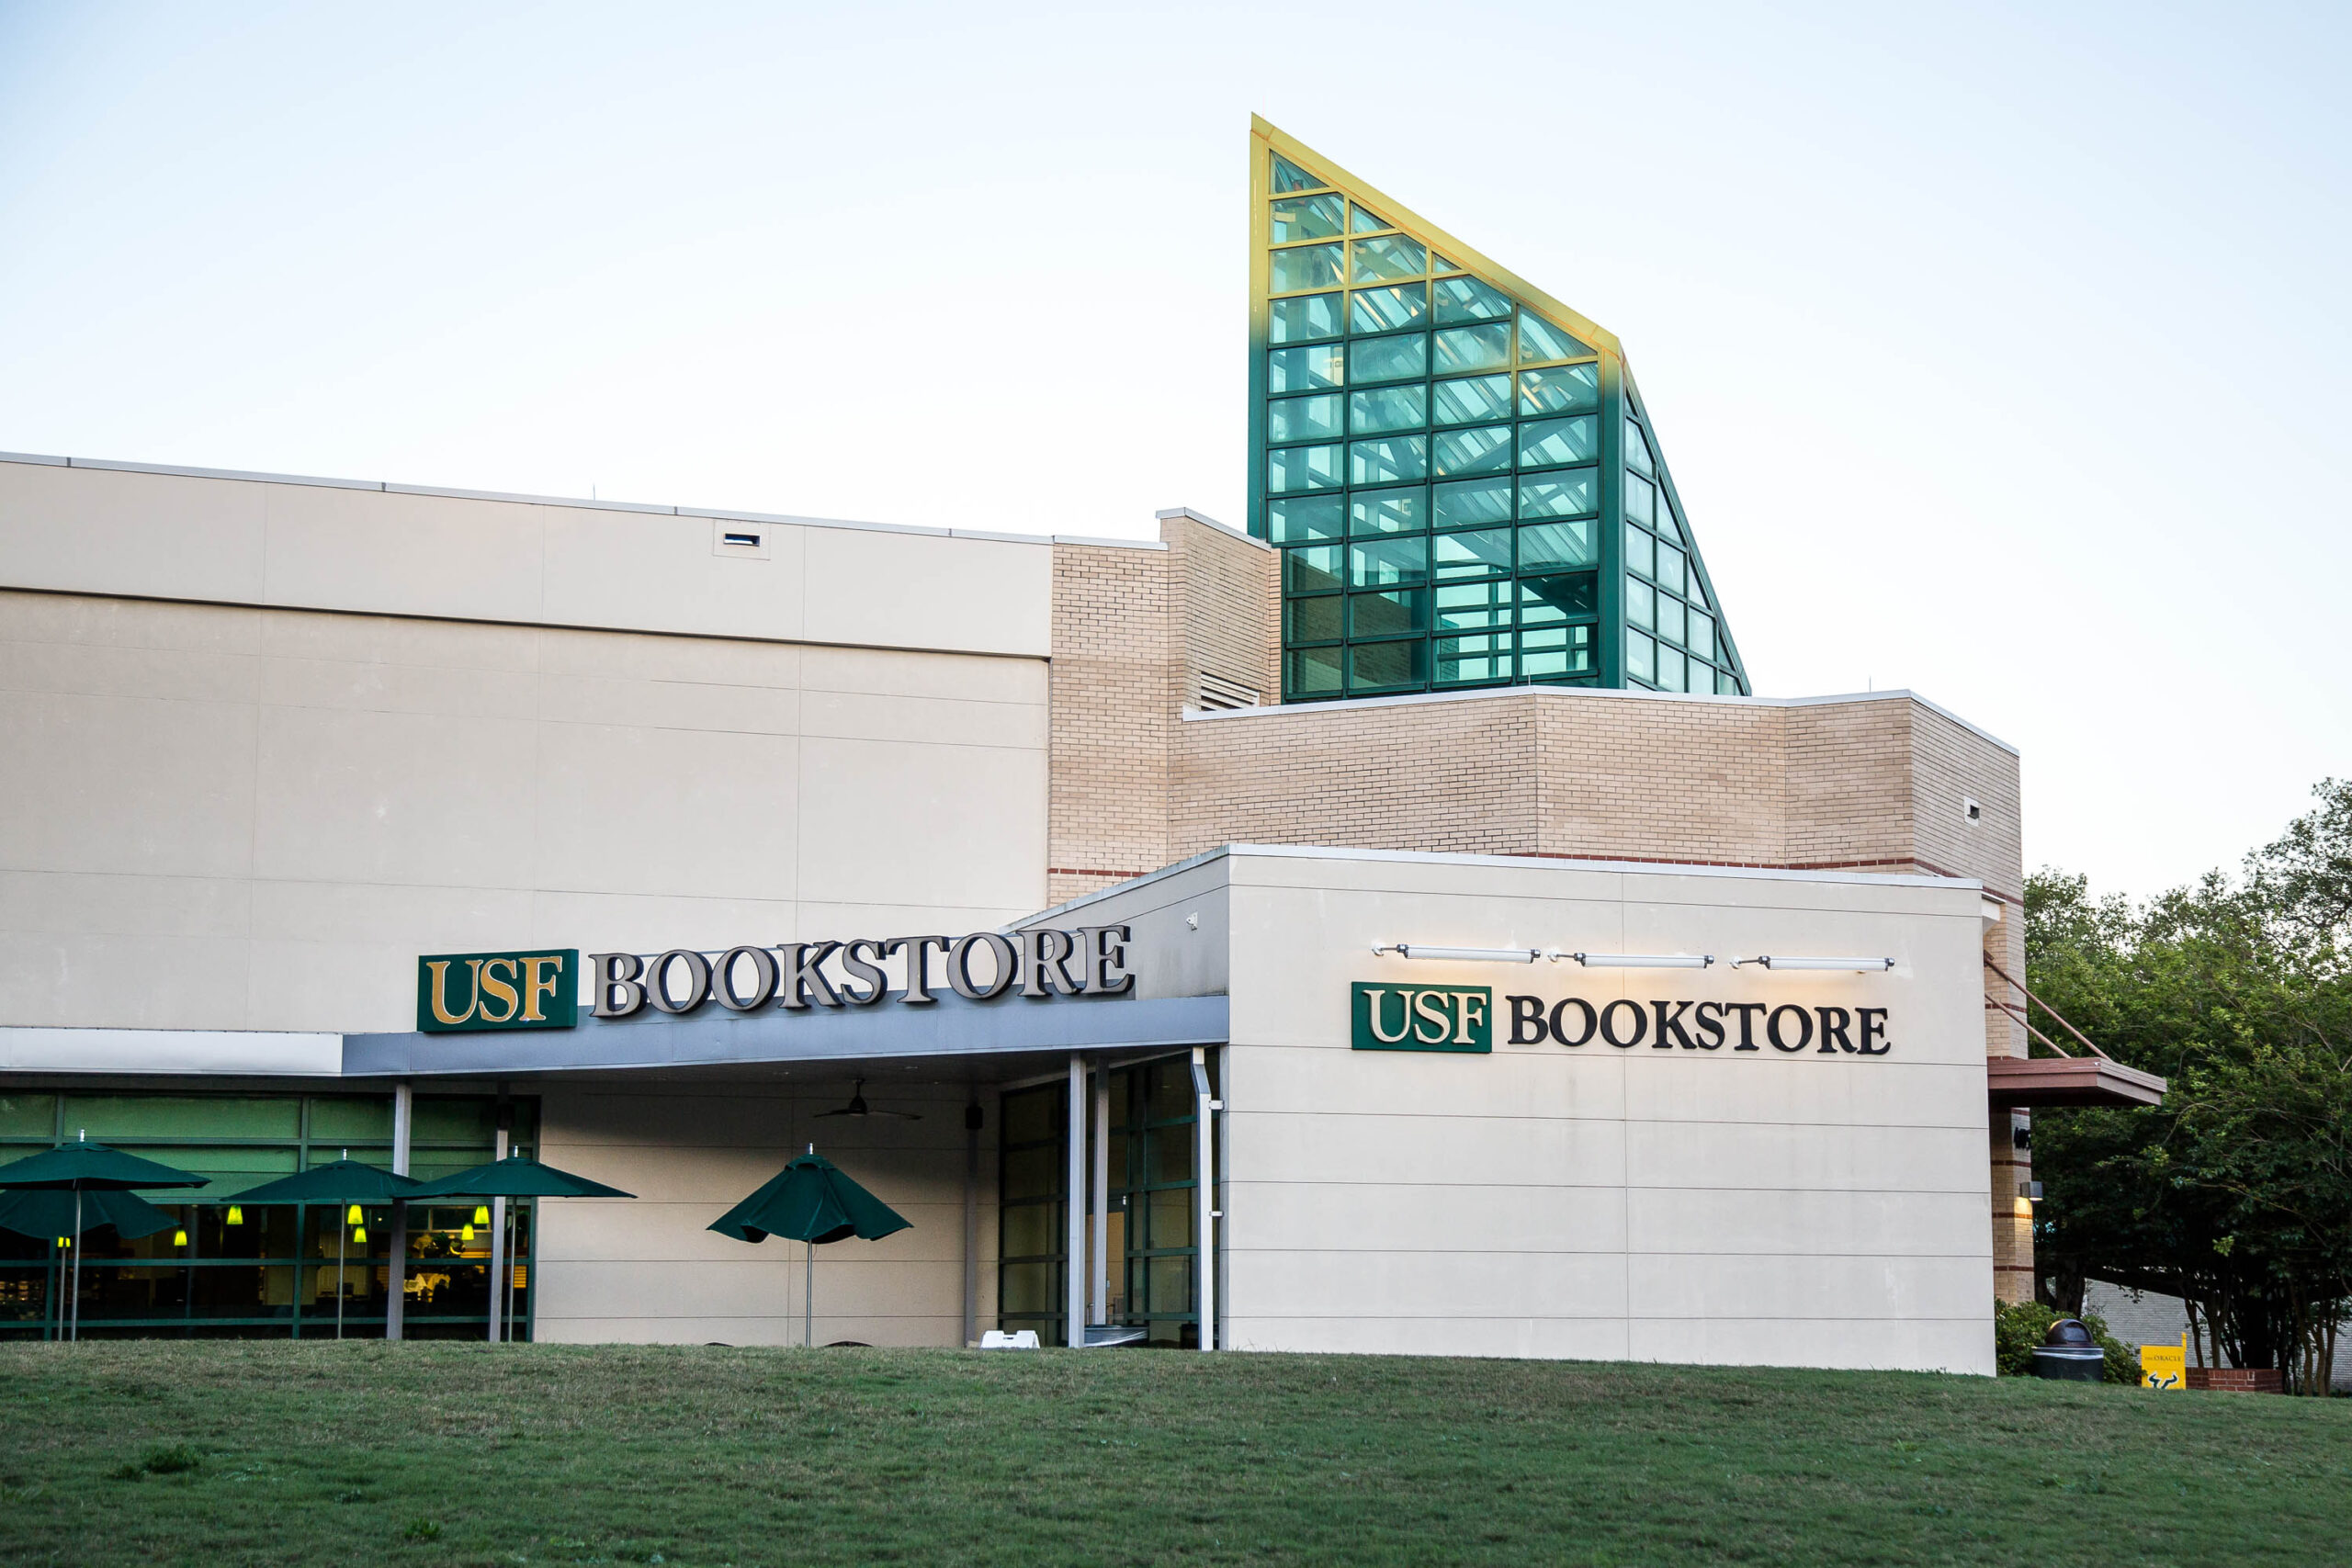 USF Bookstore to carry out textbook returns through mail, cap and gown returns still up in the air